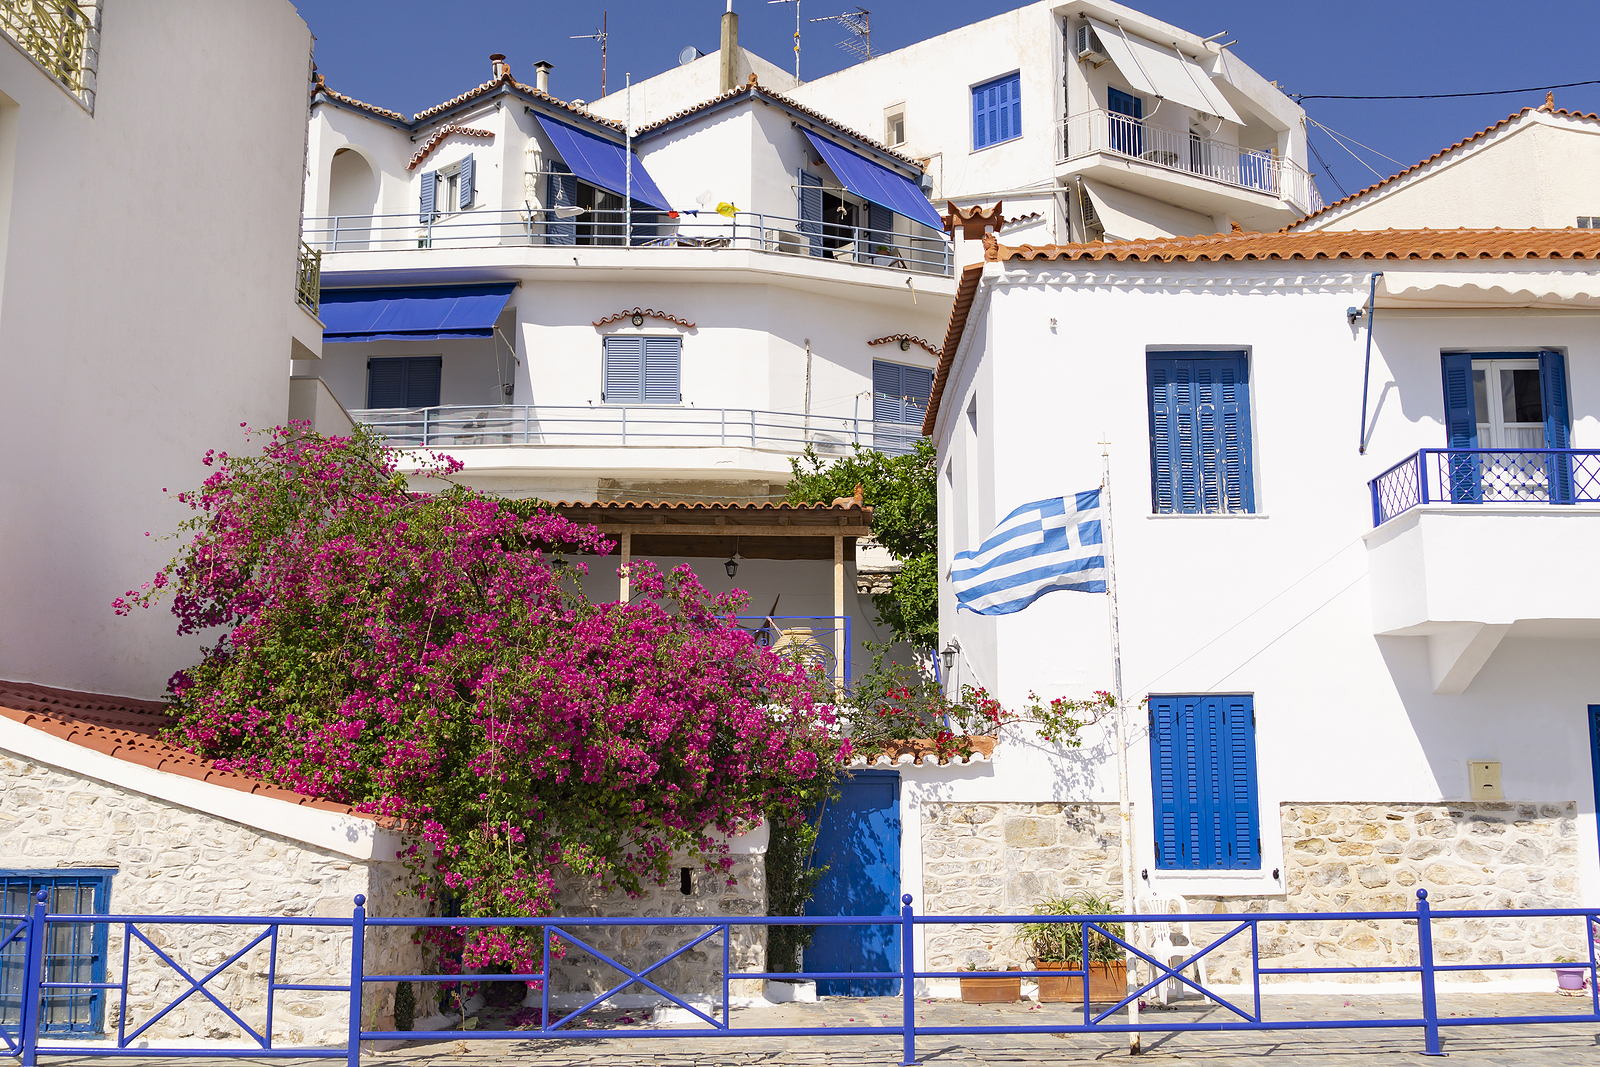 Typical White Walls And Blue Windows Of Greek Mediterranean Buil